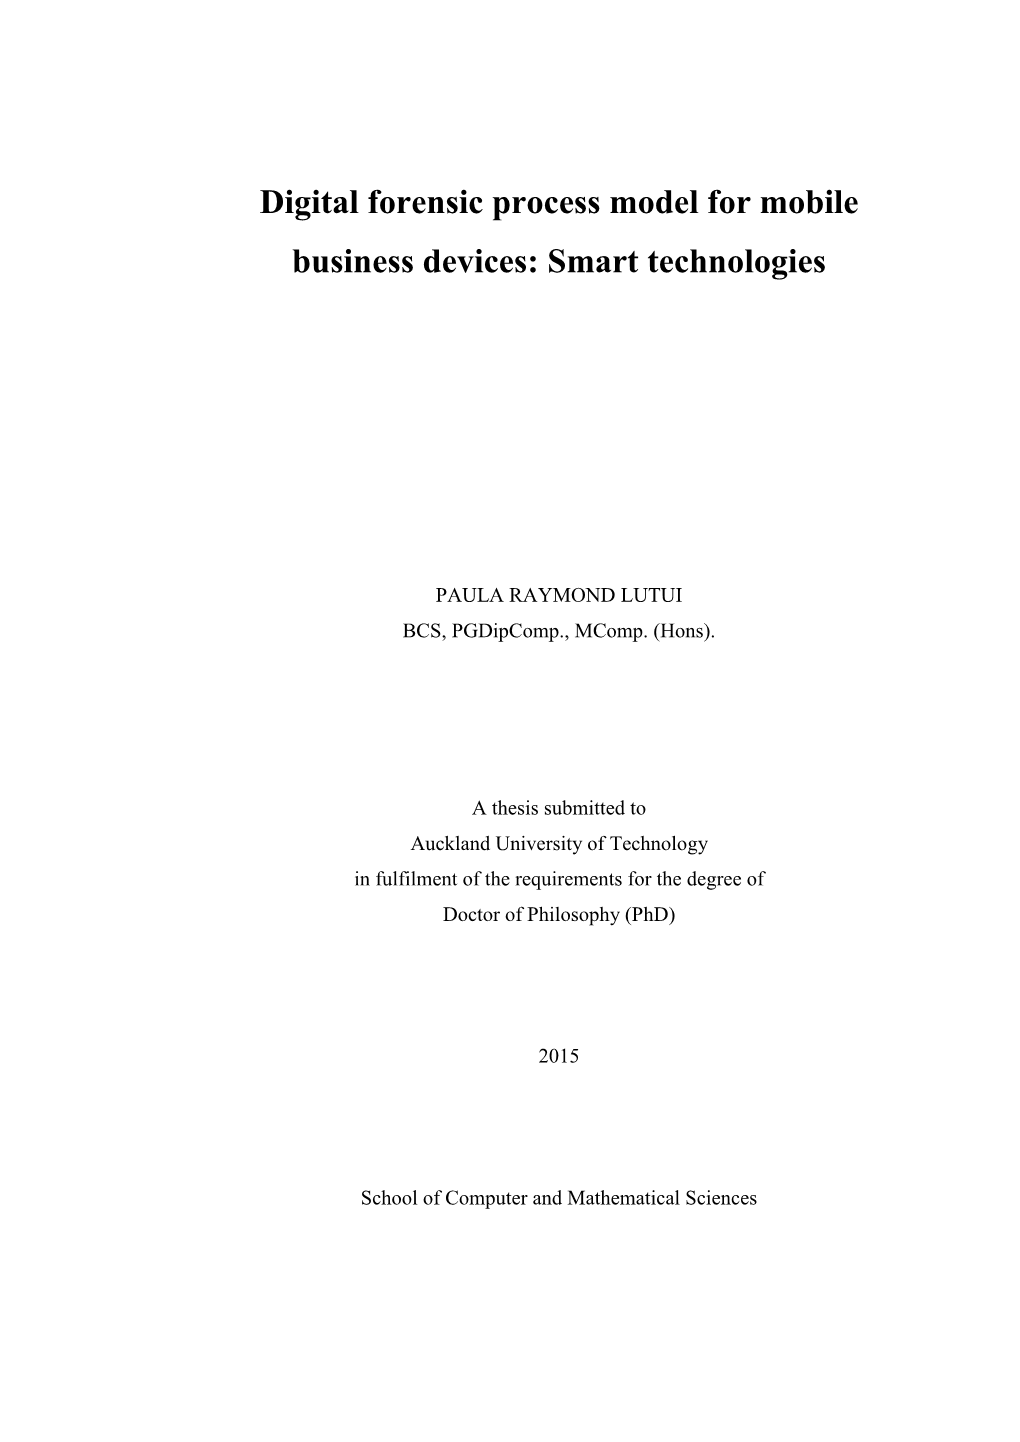 Digital Forensic Process Model for Mobile Business Devices: Smart Technologies”